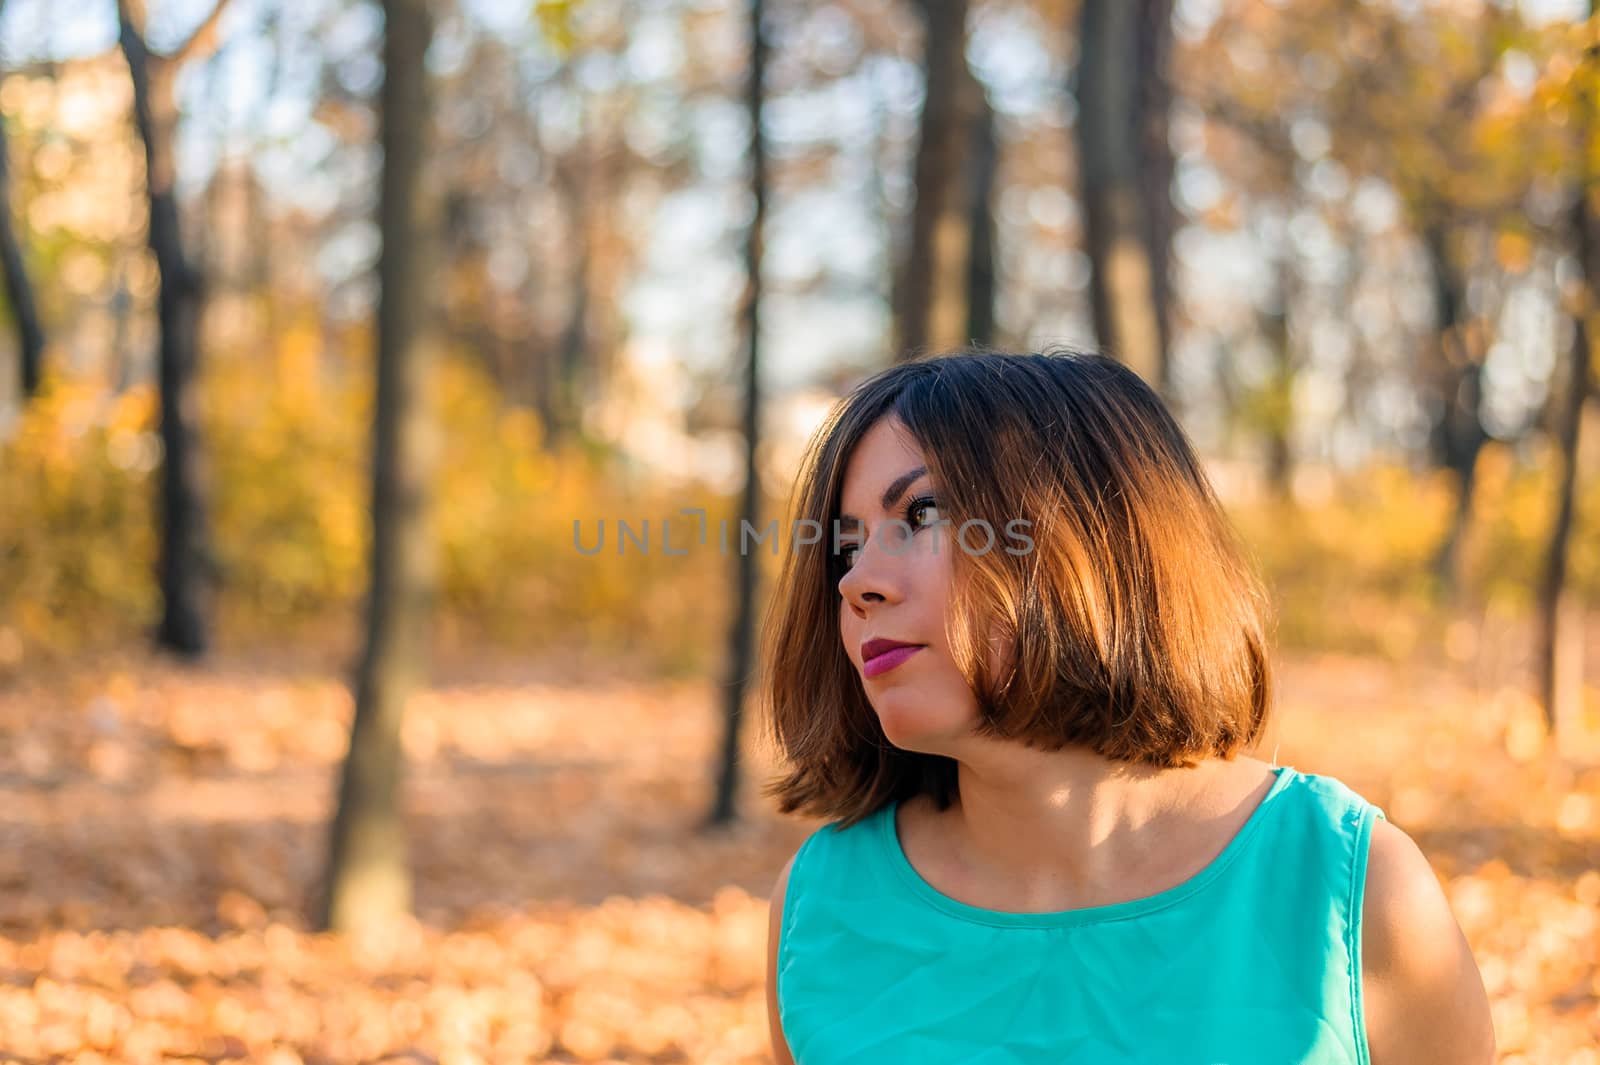 close portrait of a young woman with dark hair who looks away while standing in an autumn park by chernobrovin